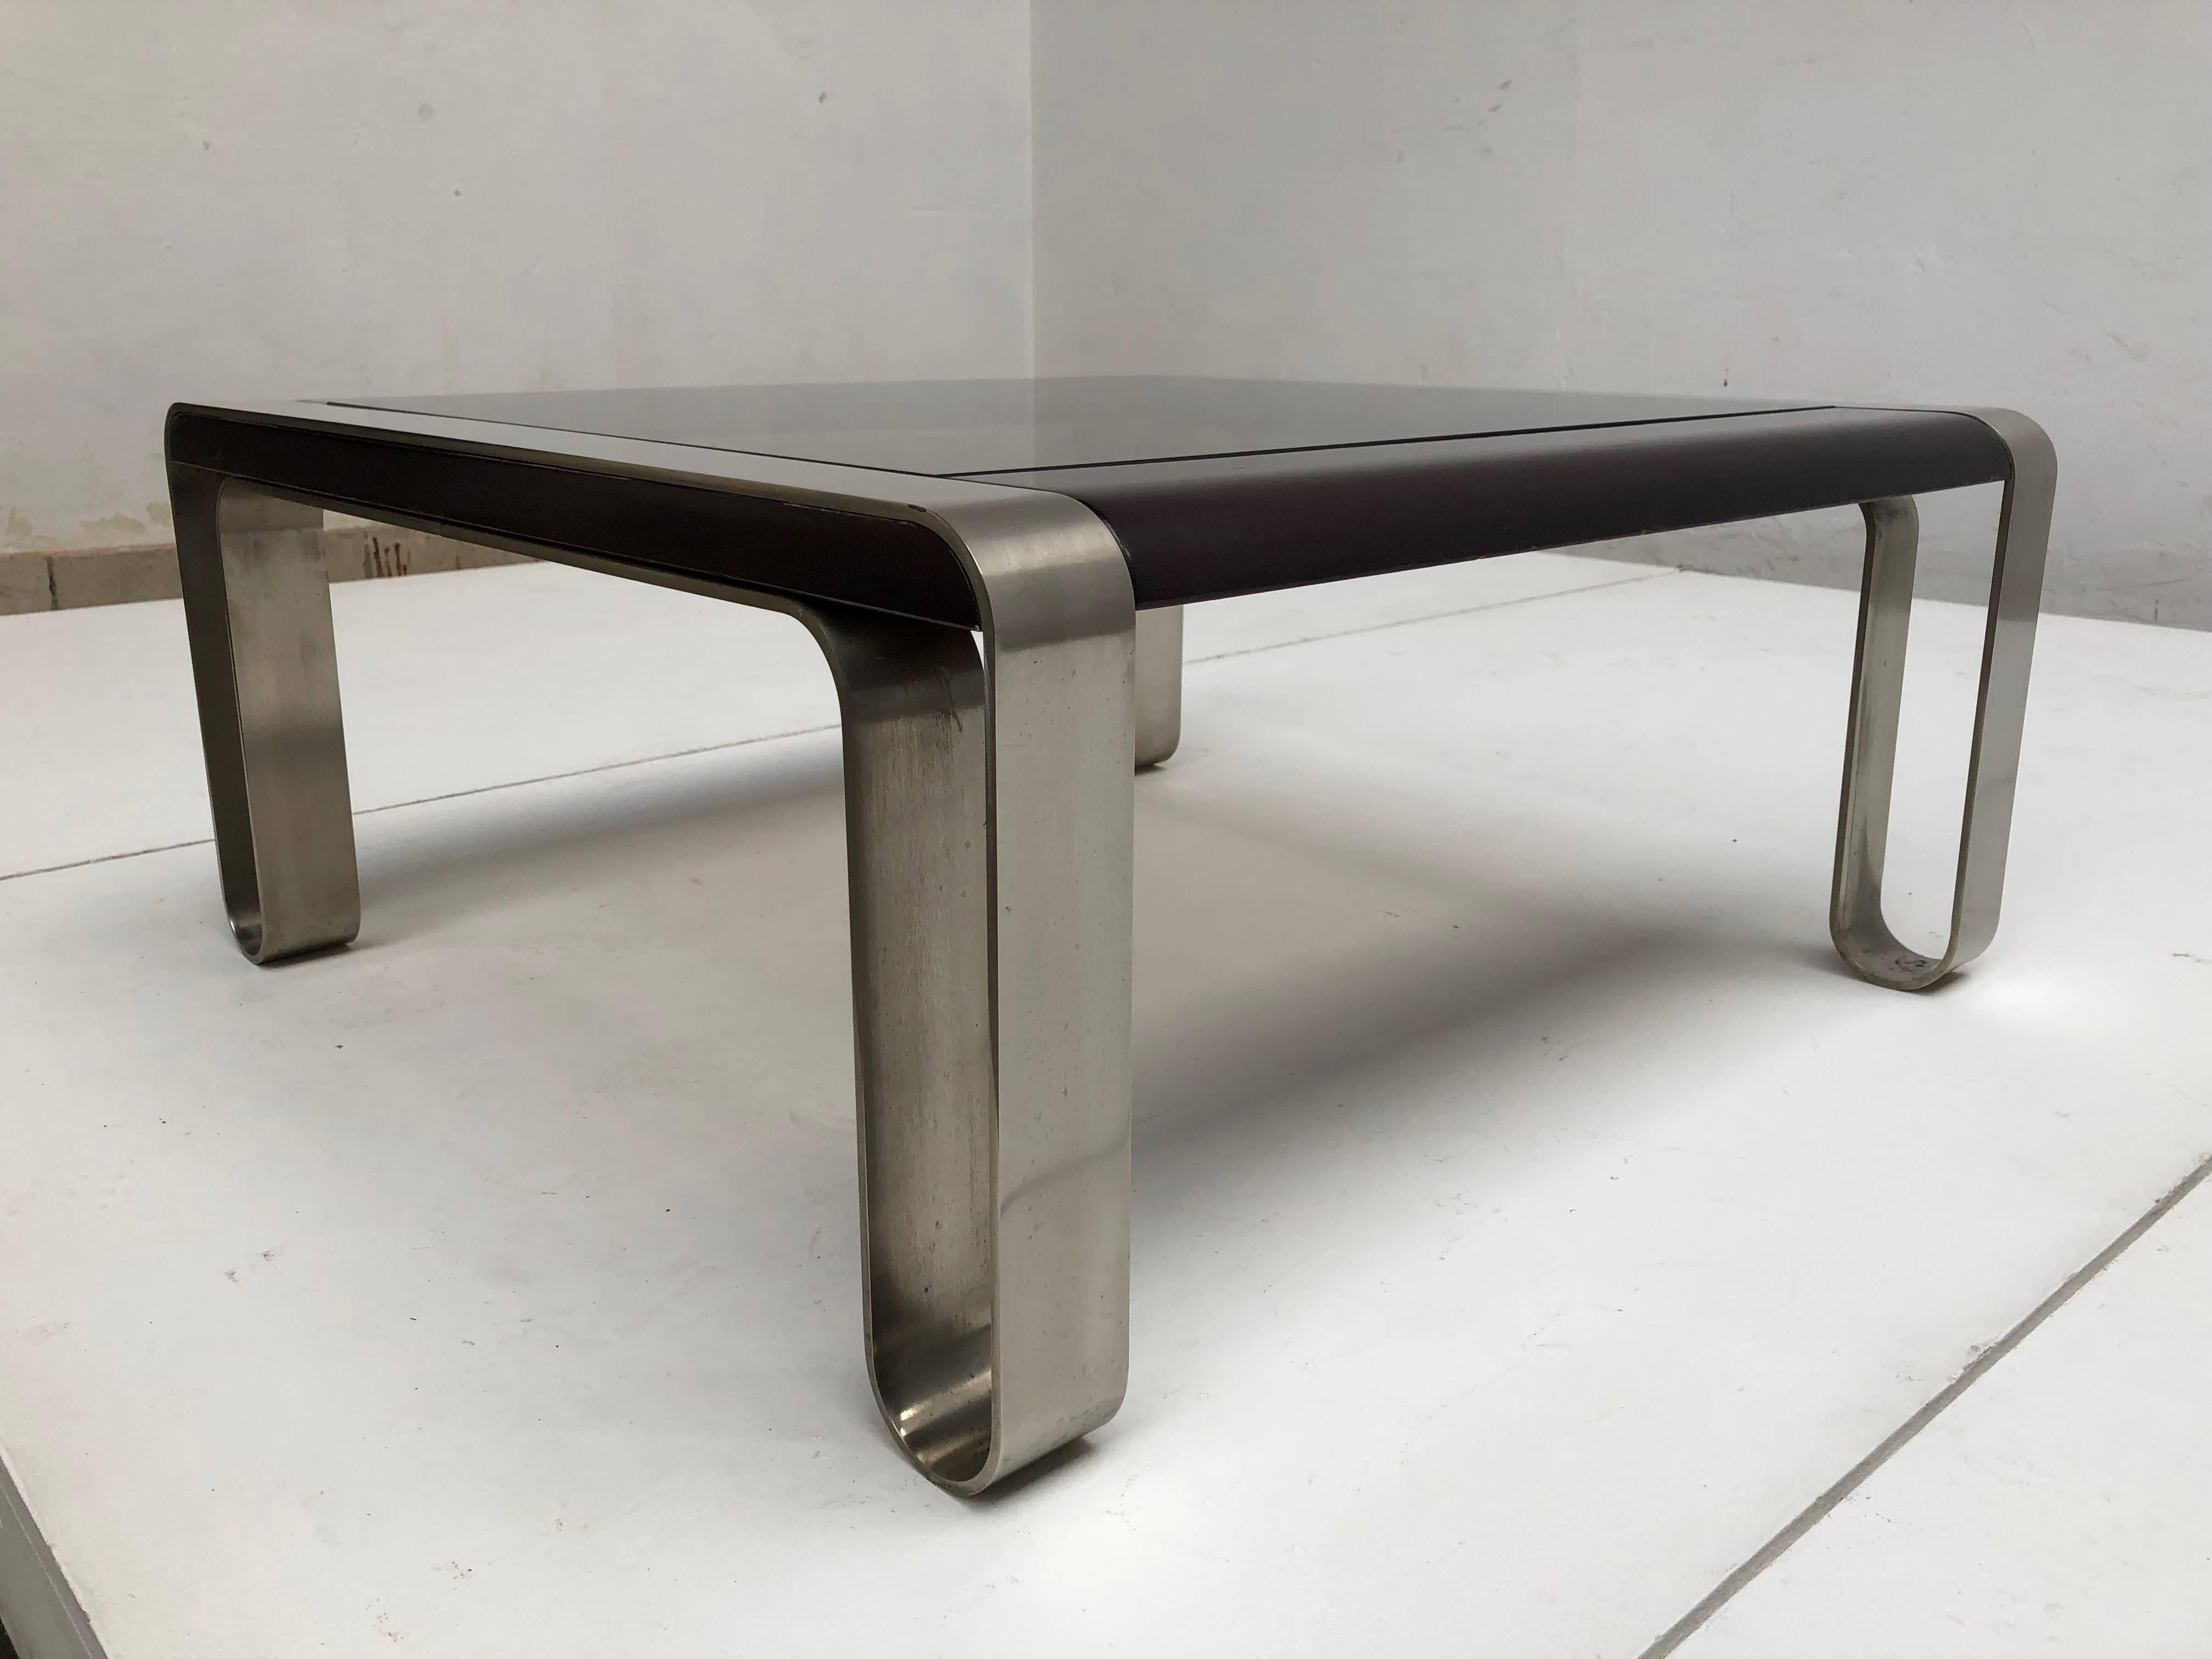 Italian, 1970s Sculptural Coffee or Side Table Nickel-Plated Steel, Wood & Glass For Sale 2